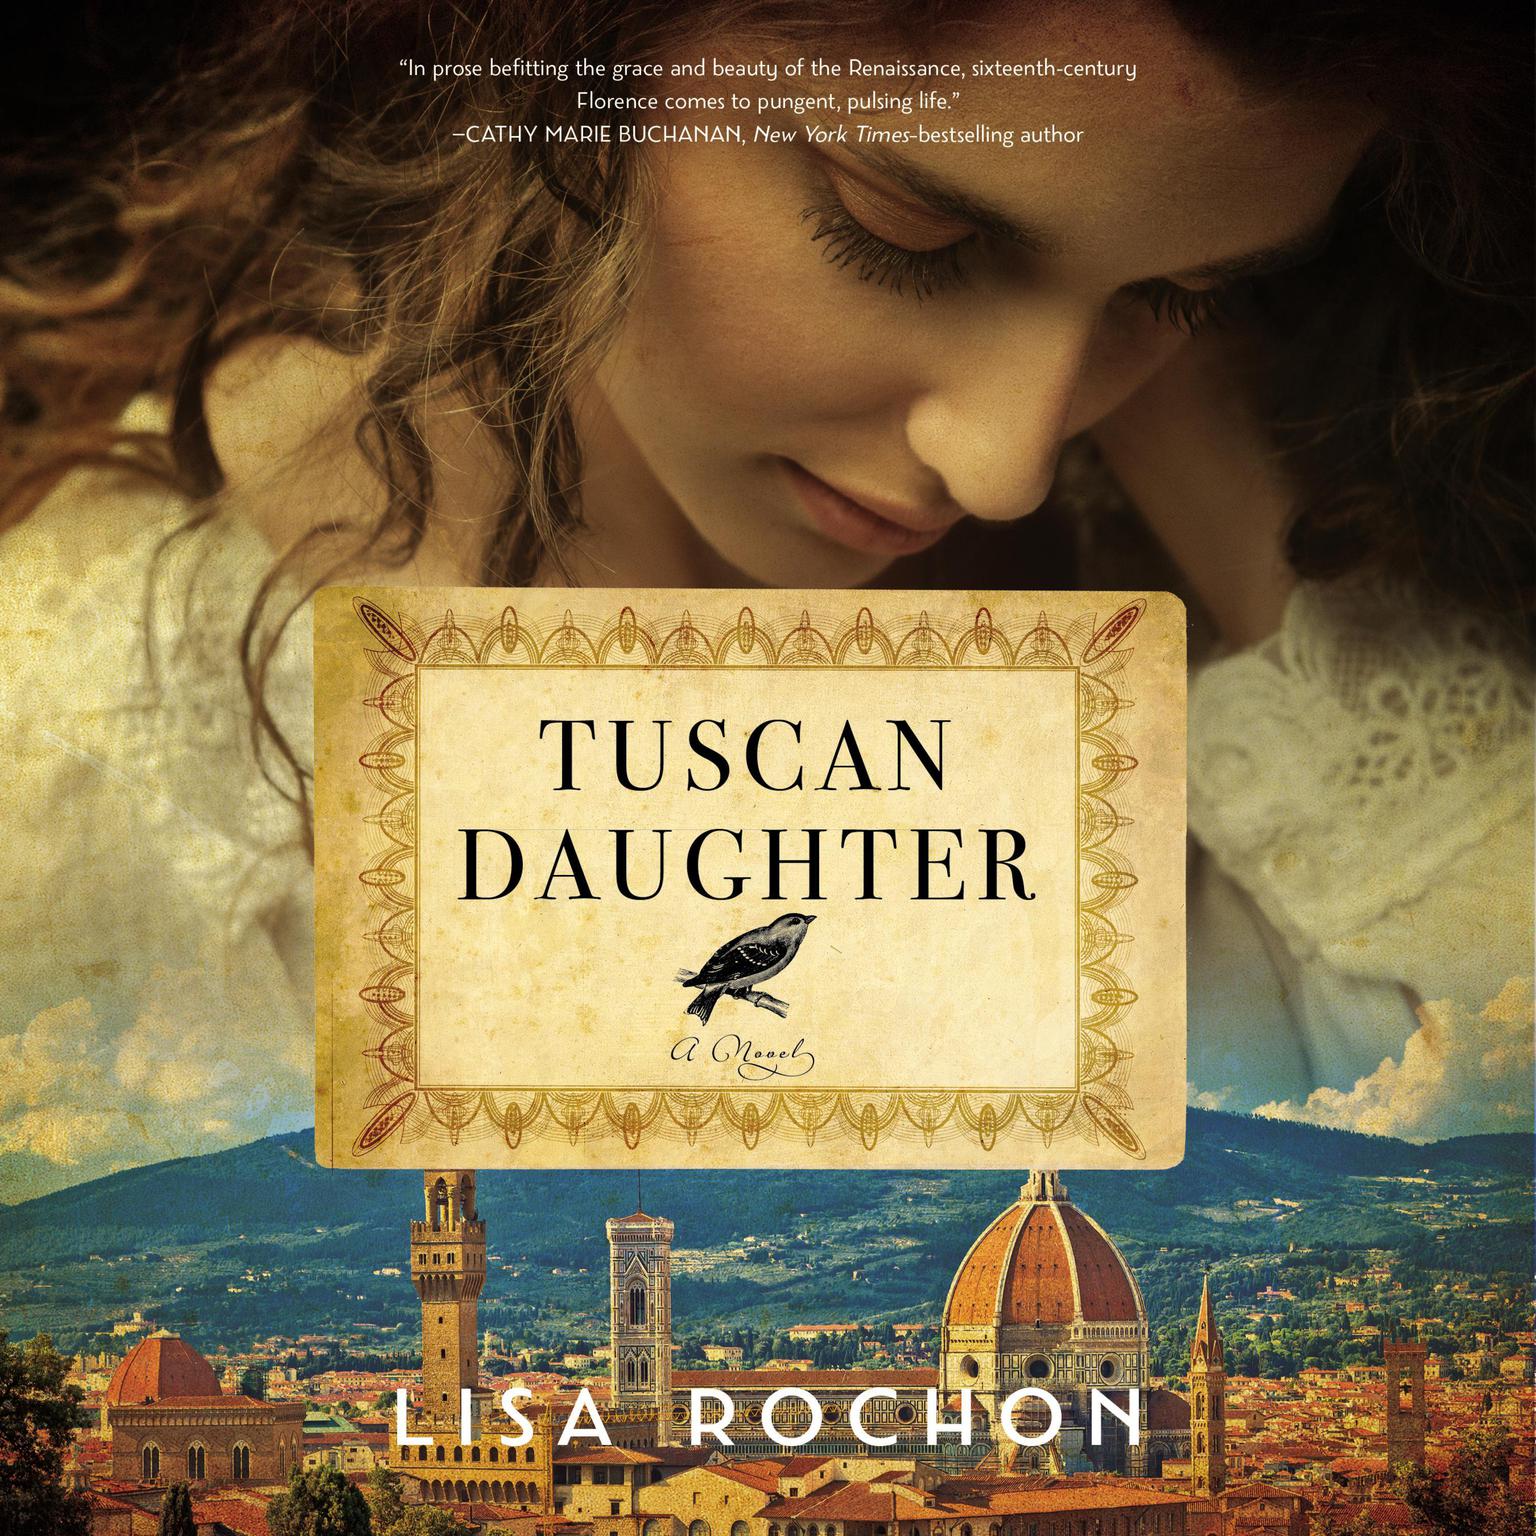 Tuscan Daughter: A Novel Audiobook, by Lisa Rochon